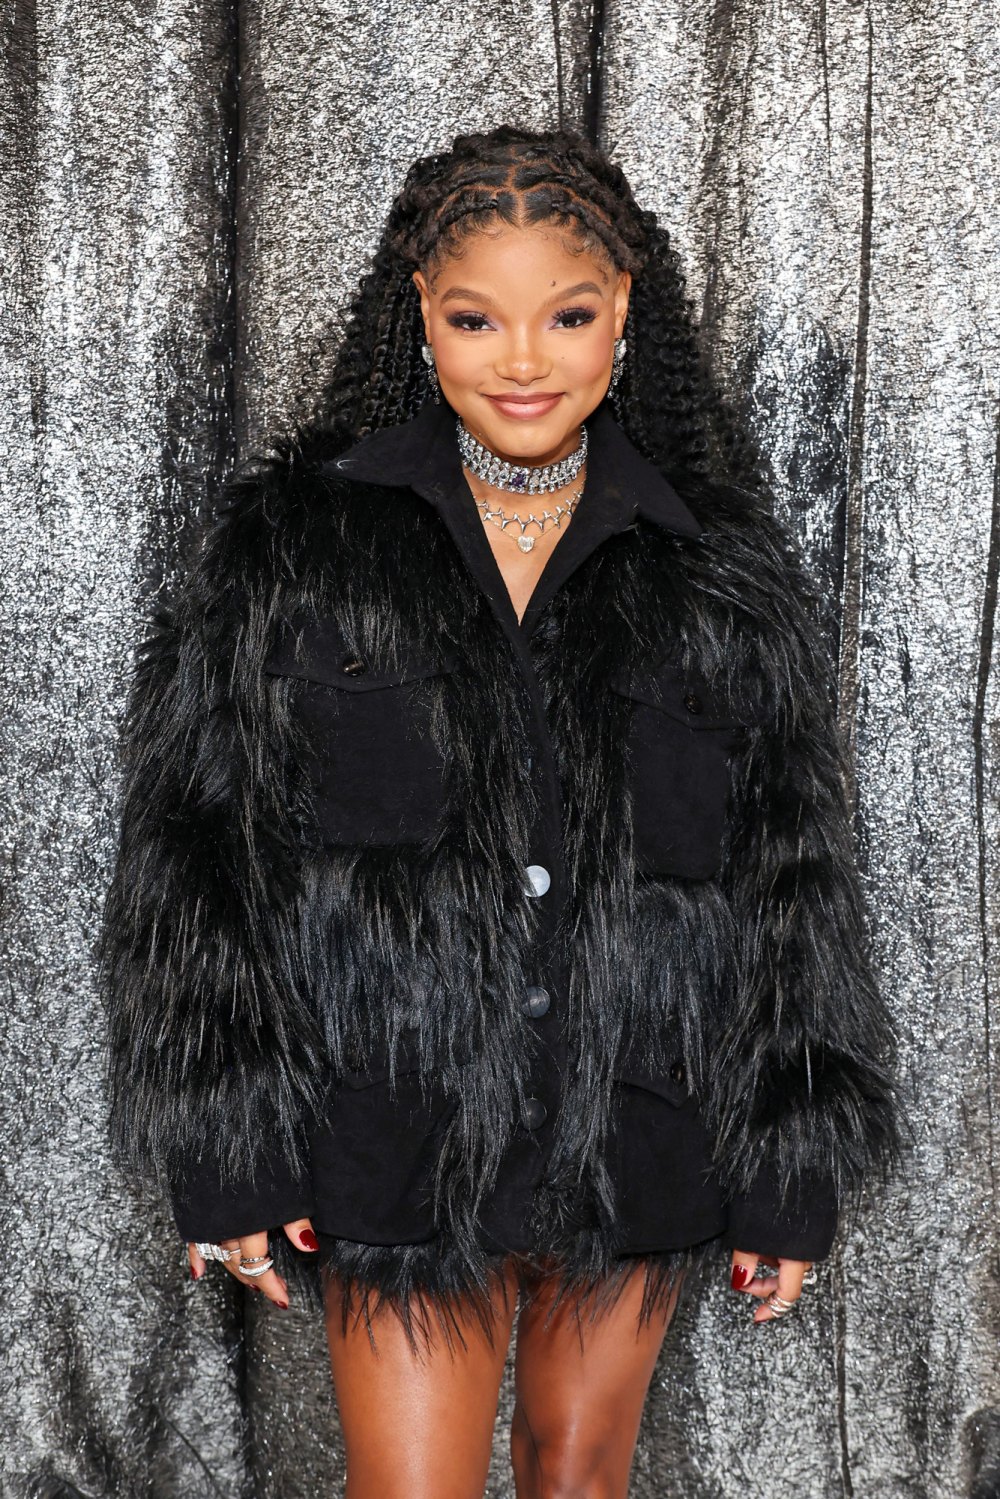 Halle Bailey Shares Gratitude for Real Supporters After Pregnancy Rumors